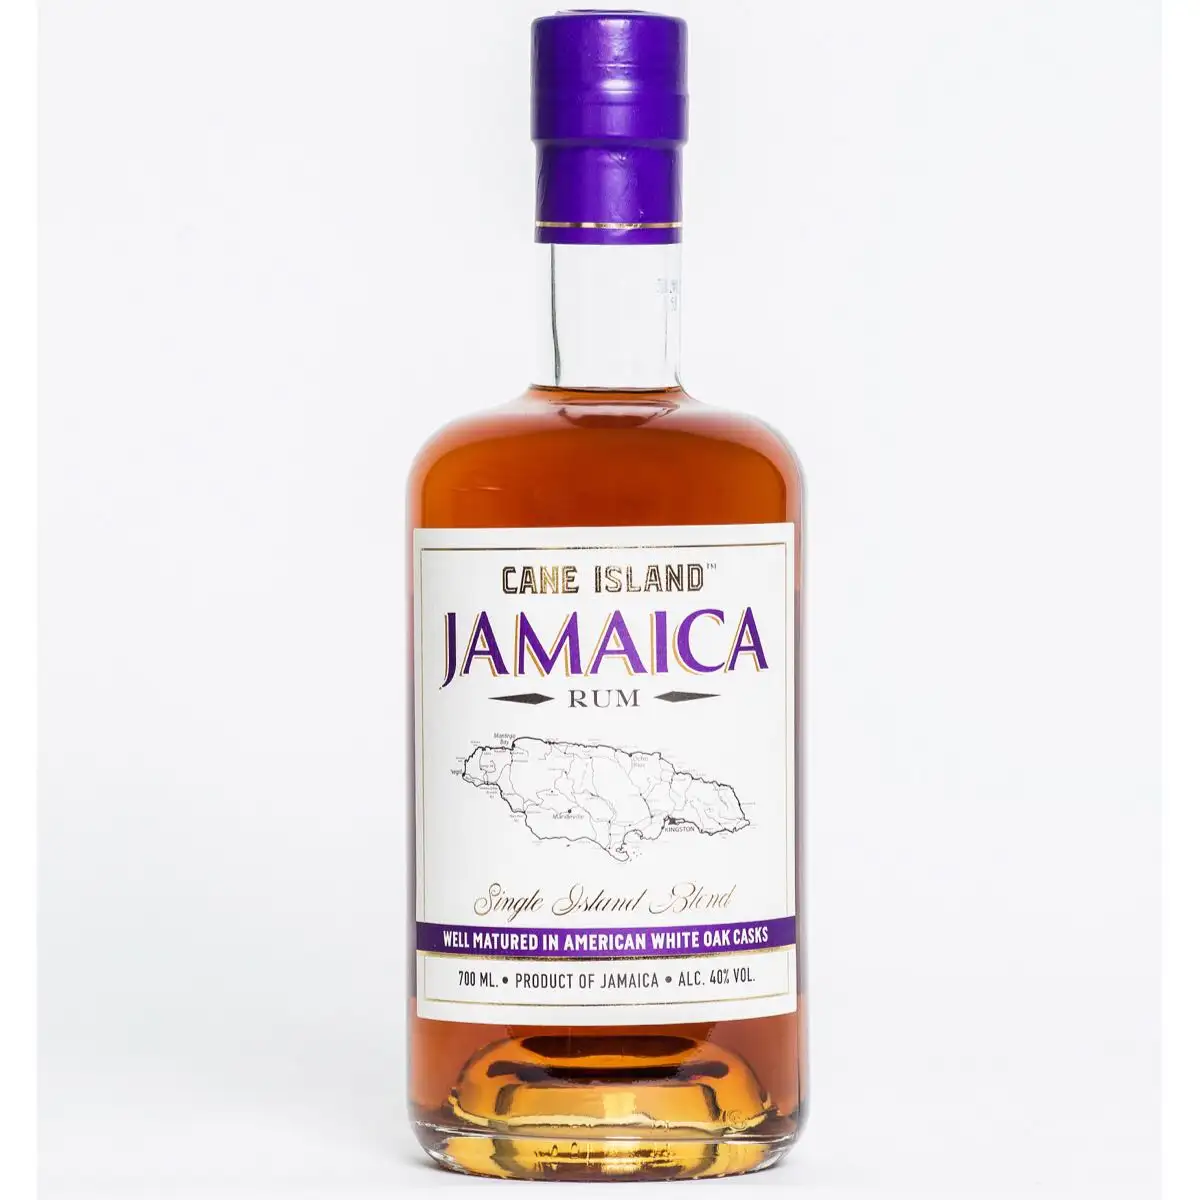 Image of the front of the bottle of the rum Jamaica - Single Island Blend